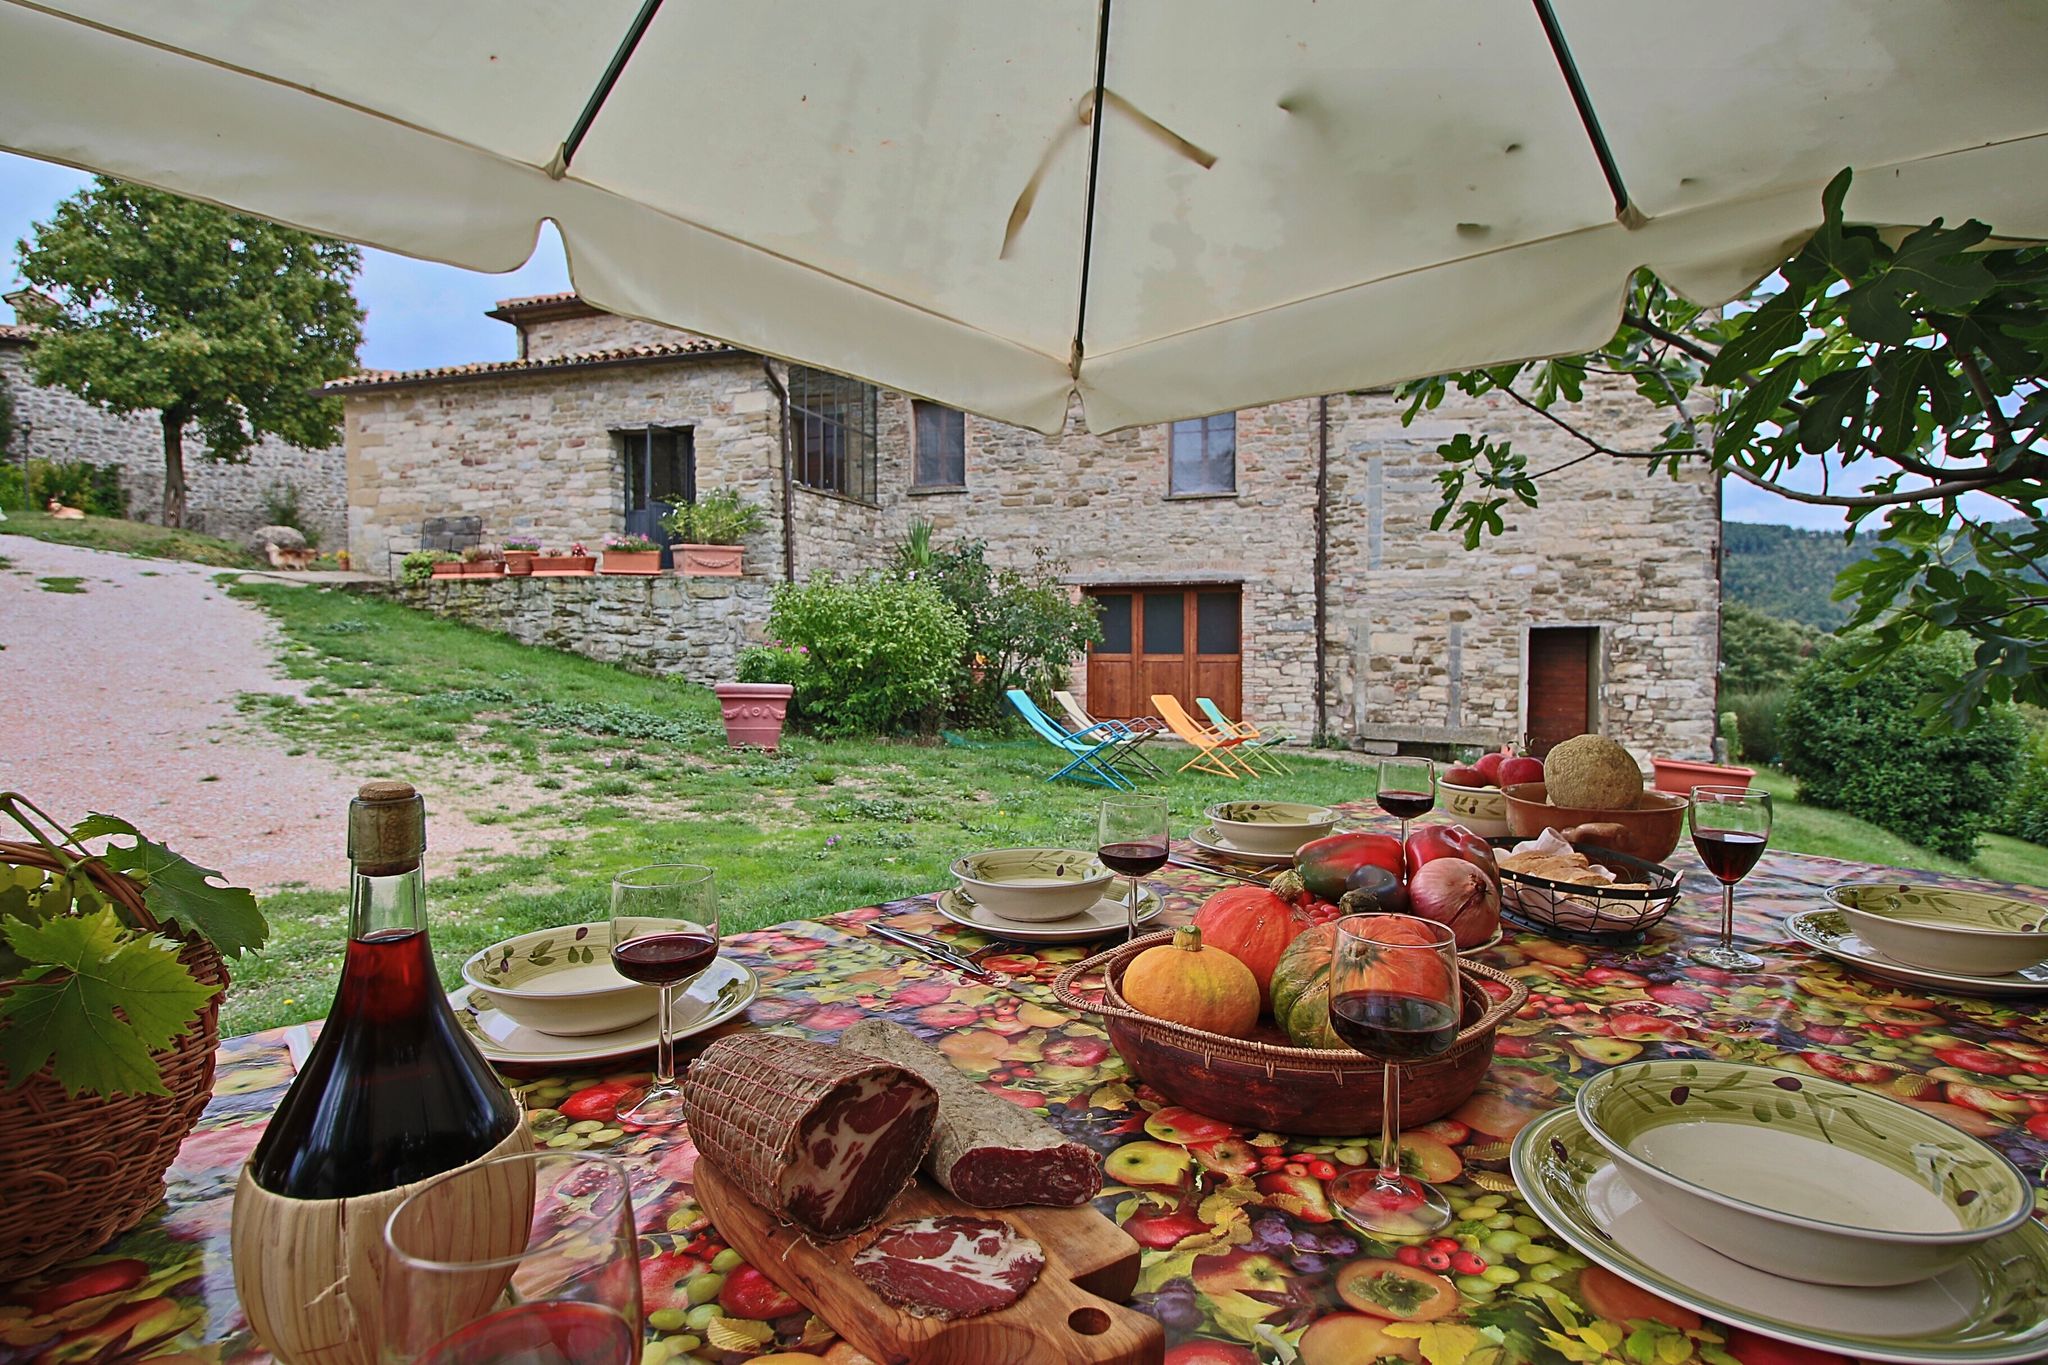 Farmhouse with pool in the hills, beautiful views, in the truffle area